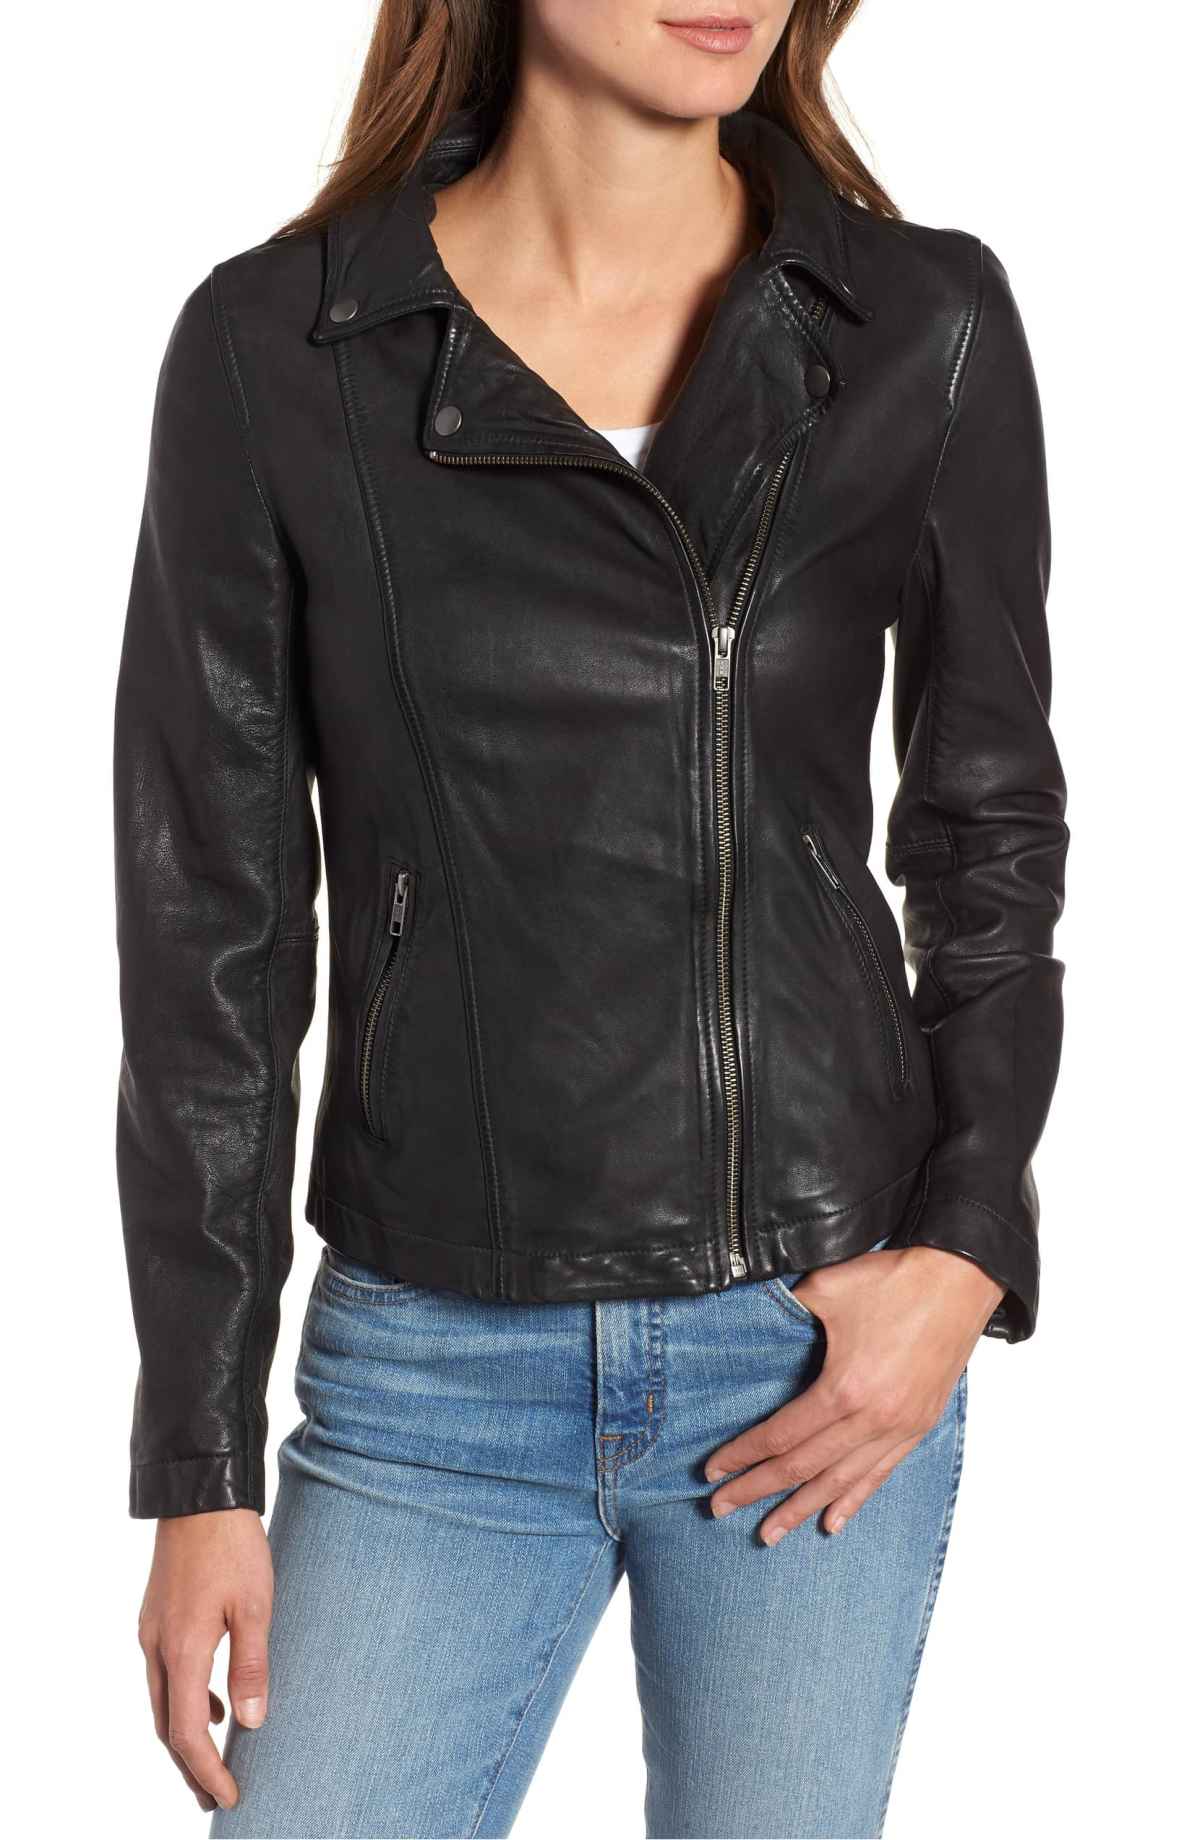 We Found the Perfect Leather Jacket for Holiday Dressing | UsWeekly